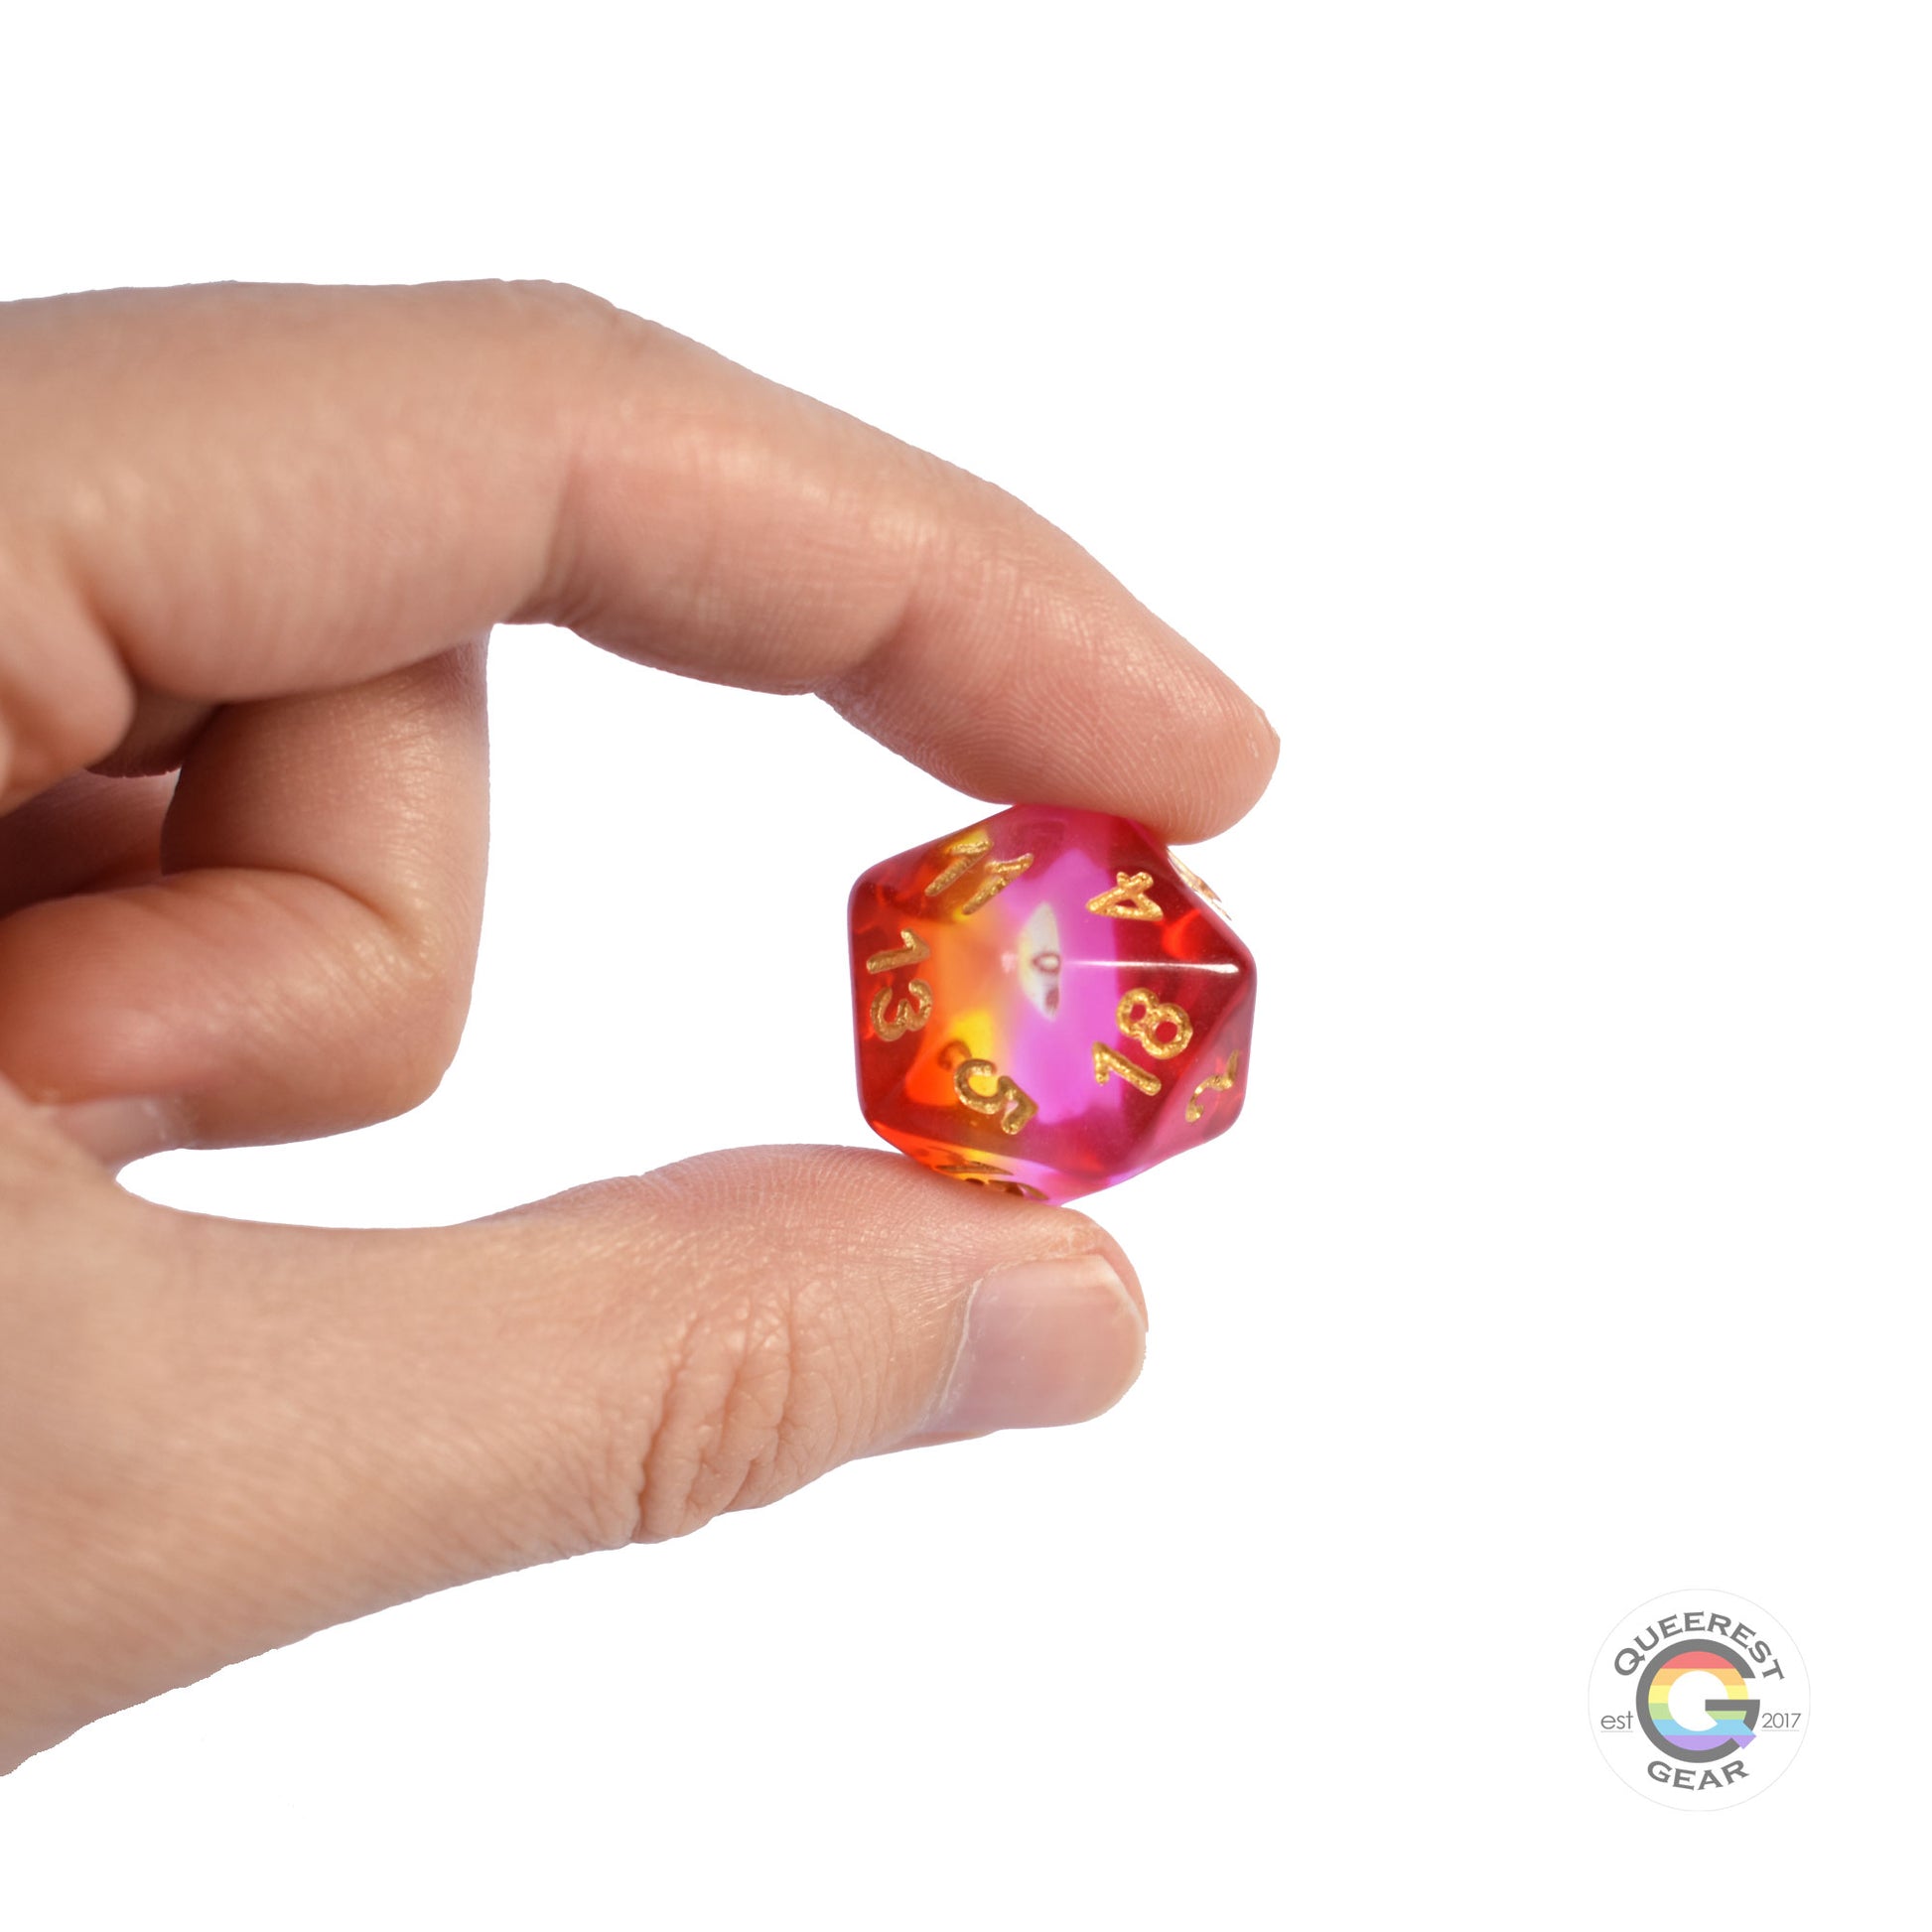 A hand holding up the lesbian d20 to show off the color and transparency